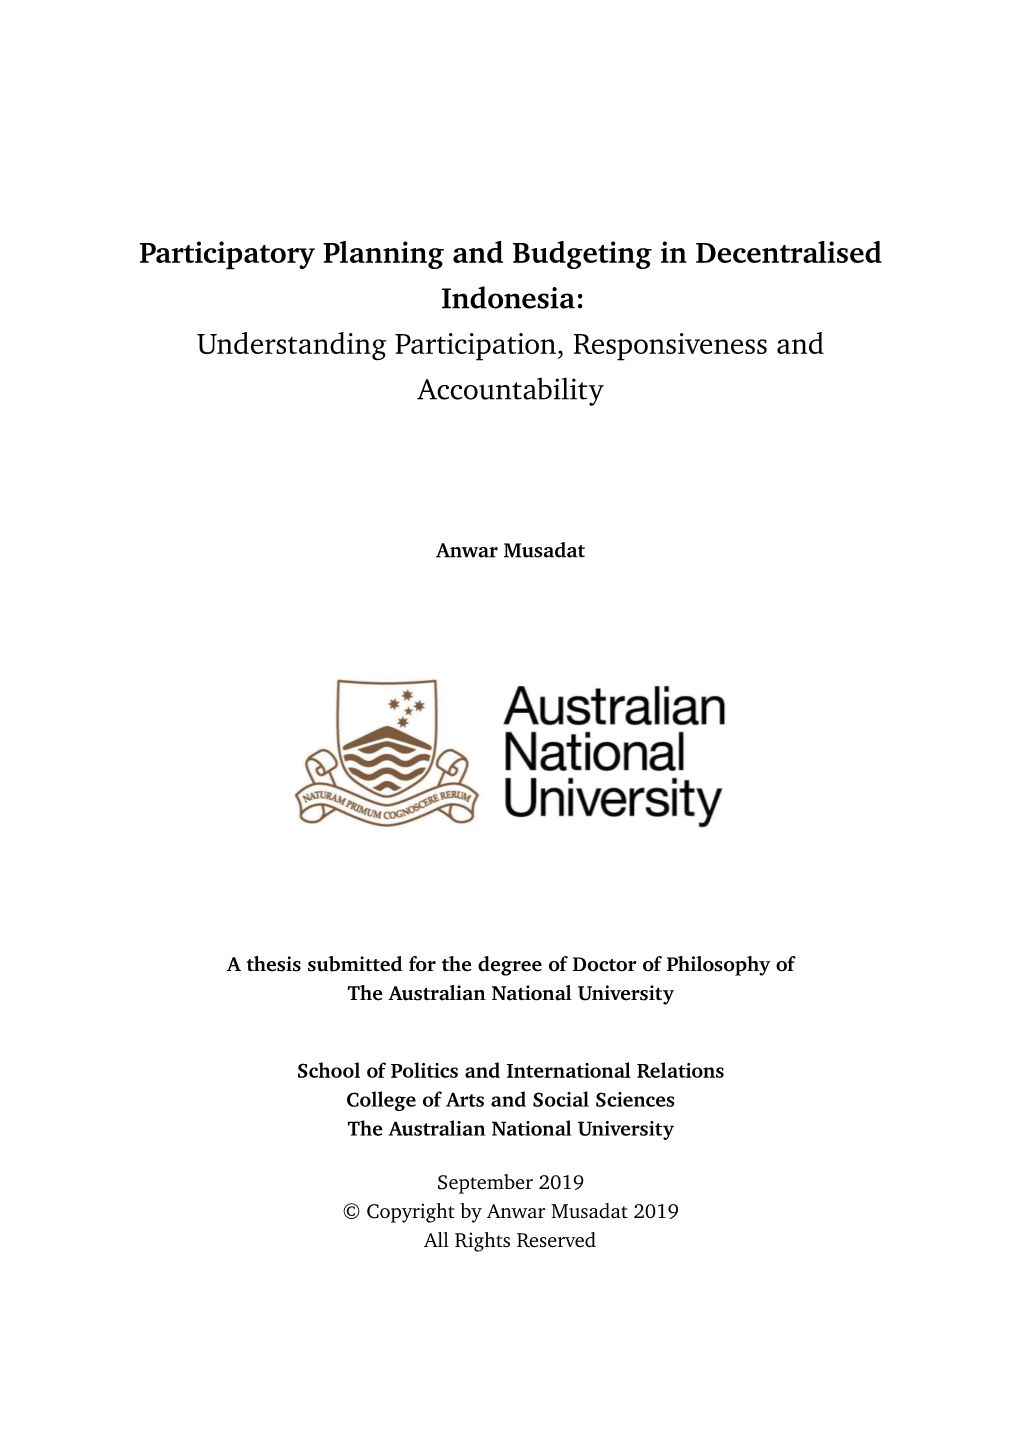 Participatory Planning and Budgeting in Decentralised Indonesia: Understanding Participation, Responsiveness and Accountability